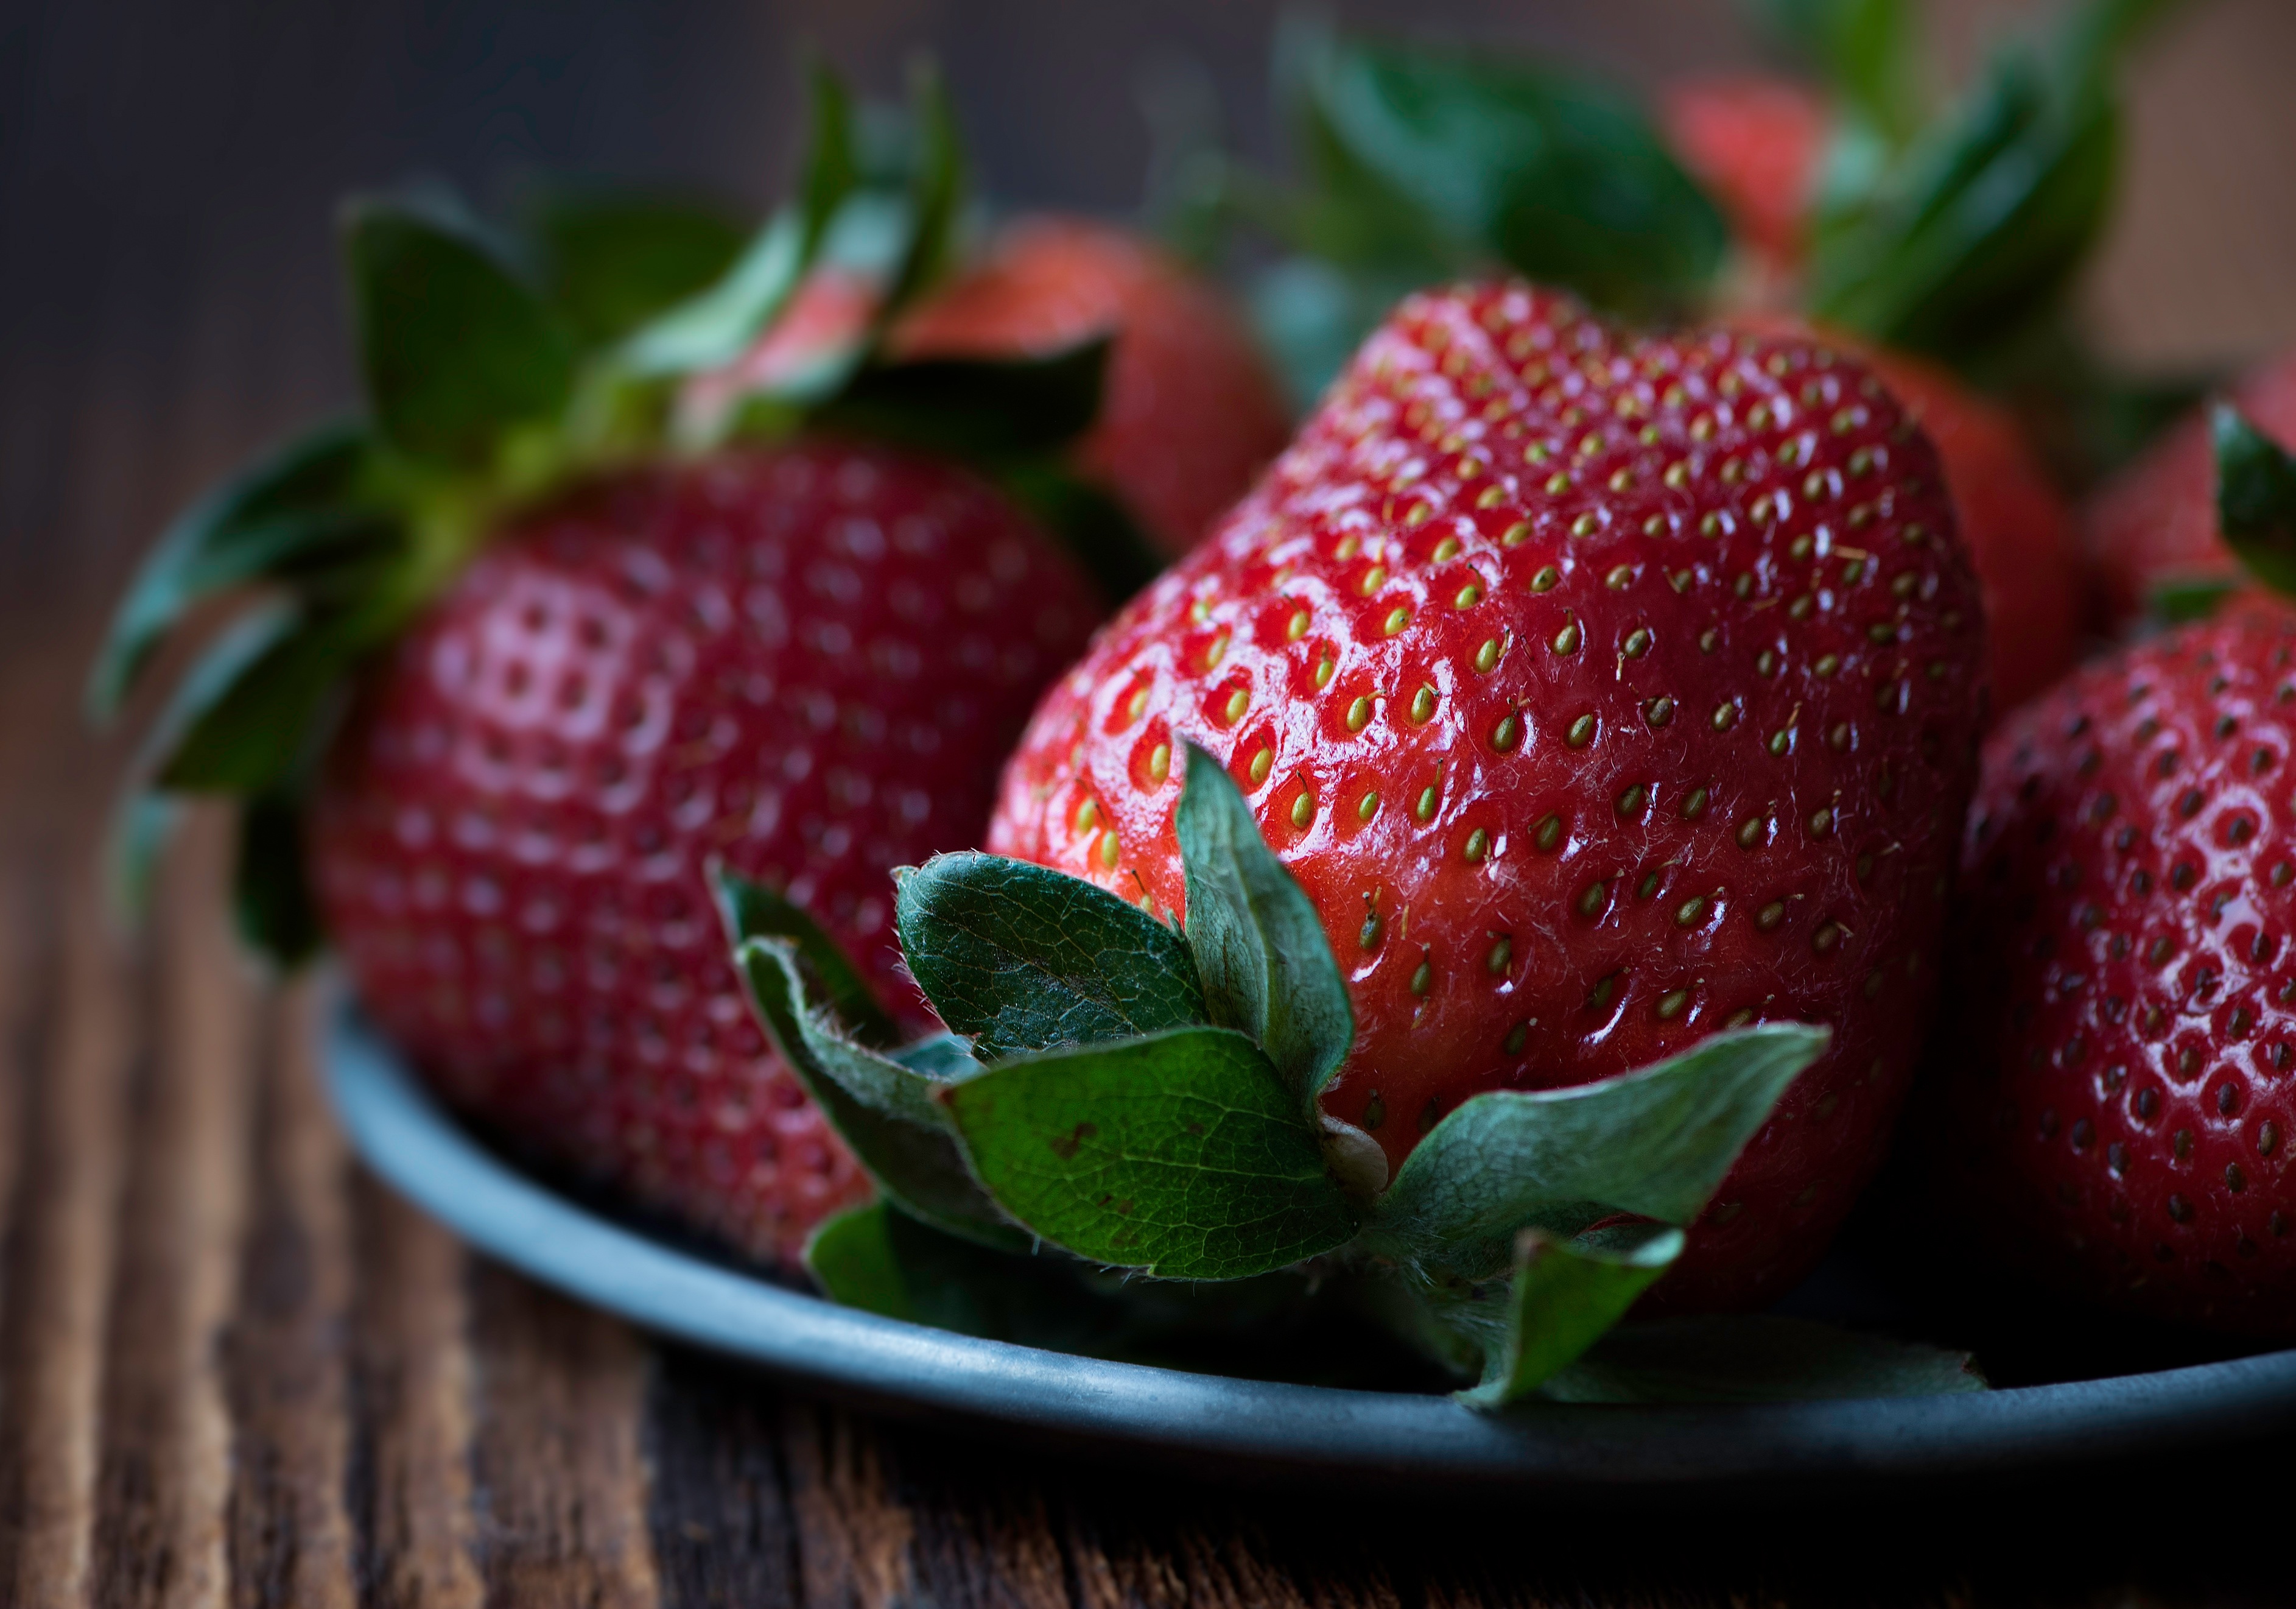 112634 download wallpaper strawberry, berries, macro screensavers and pictures for free